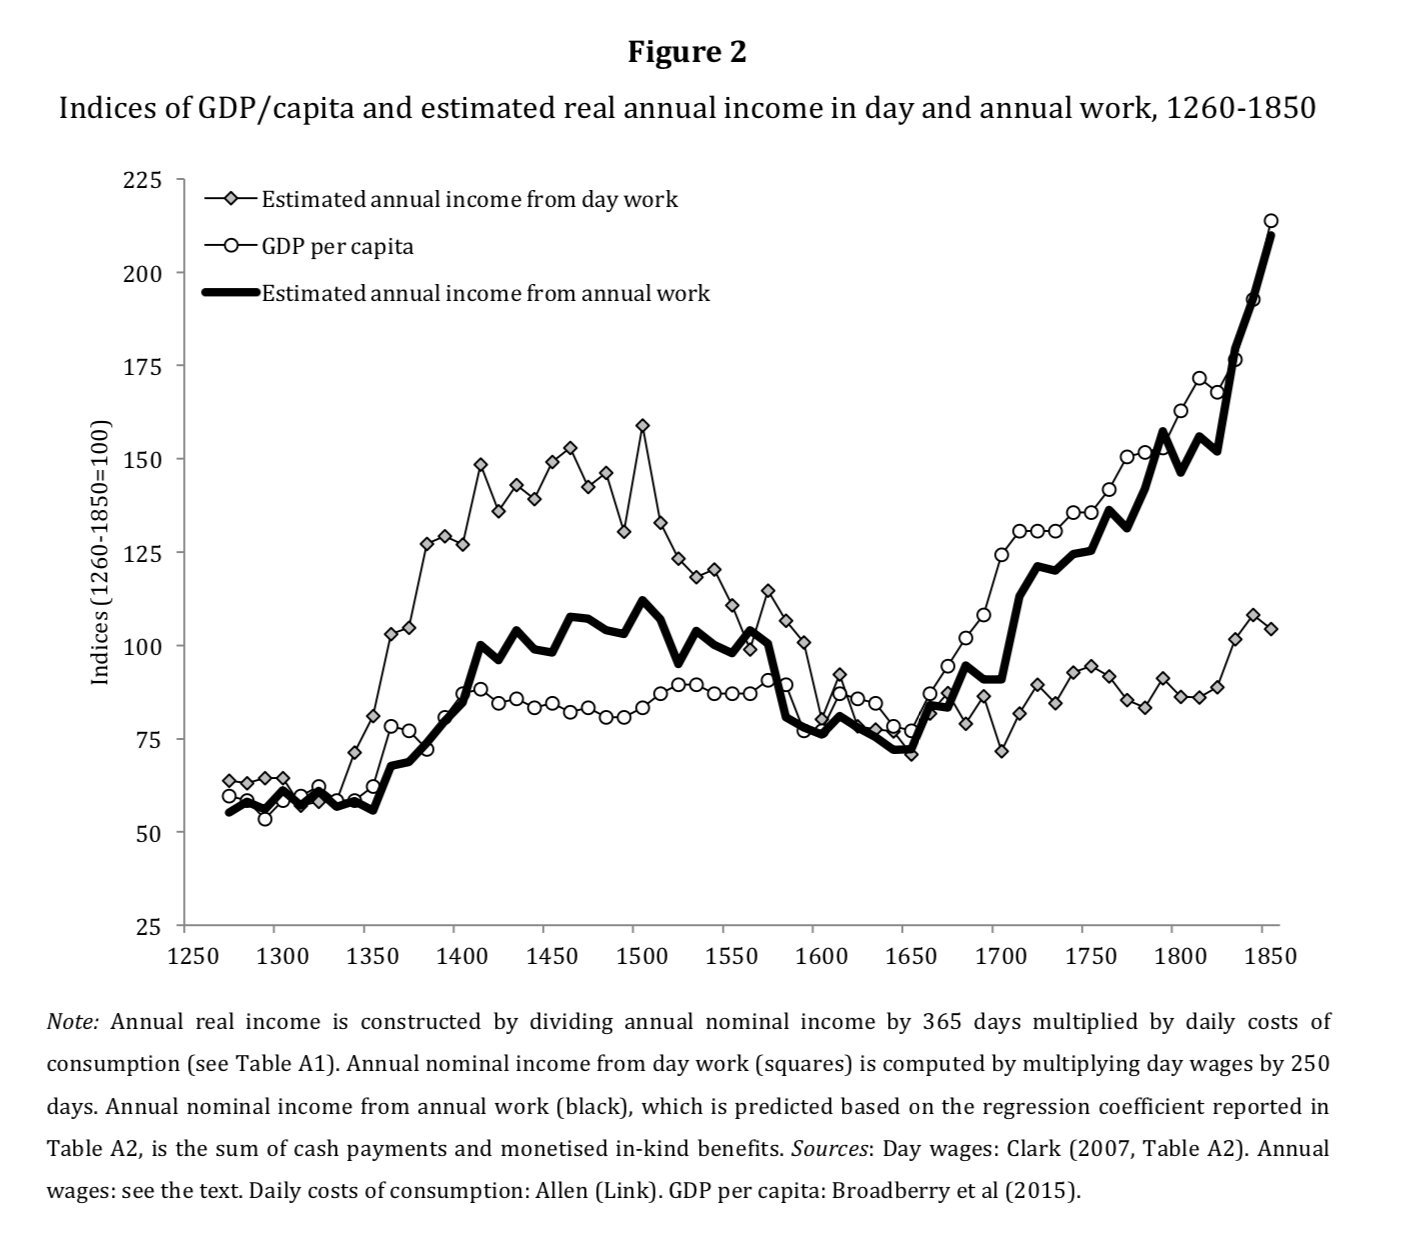 Annual earnings, GDP per capita, and wages